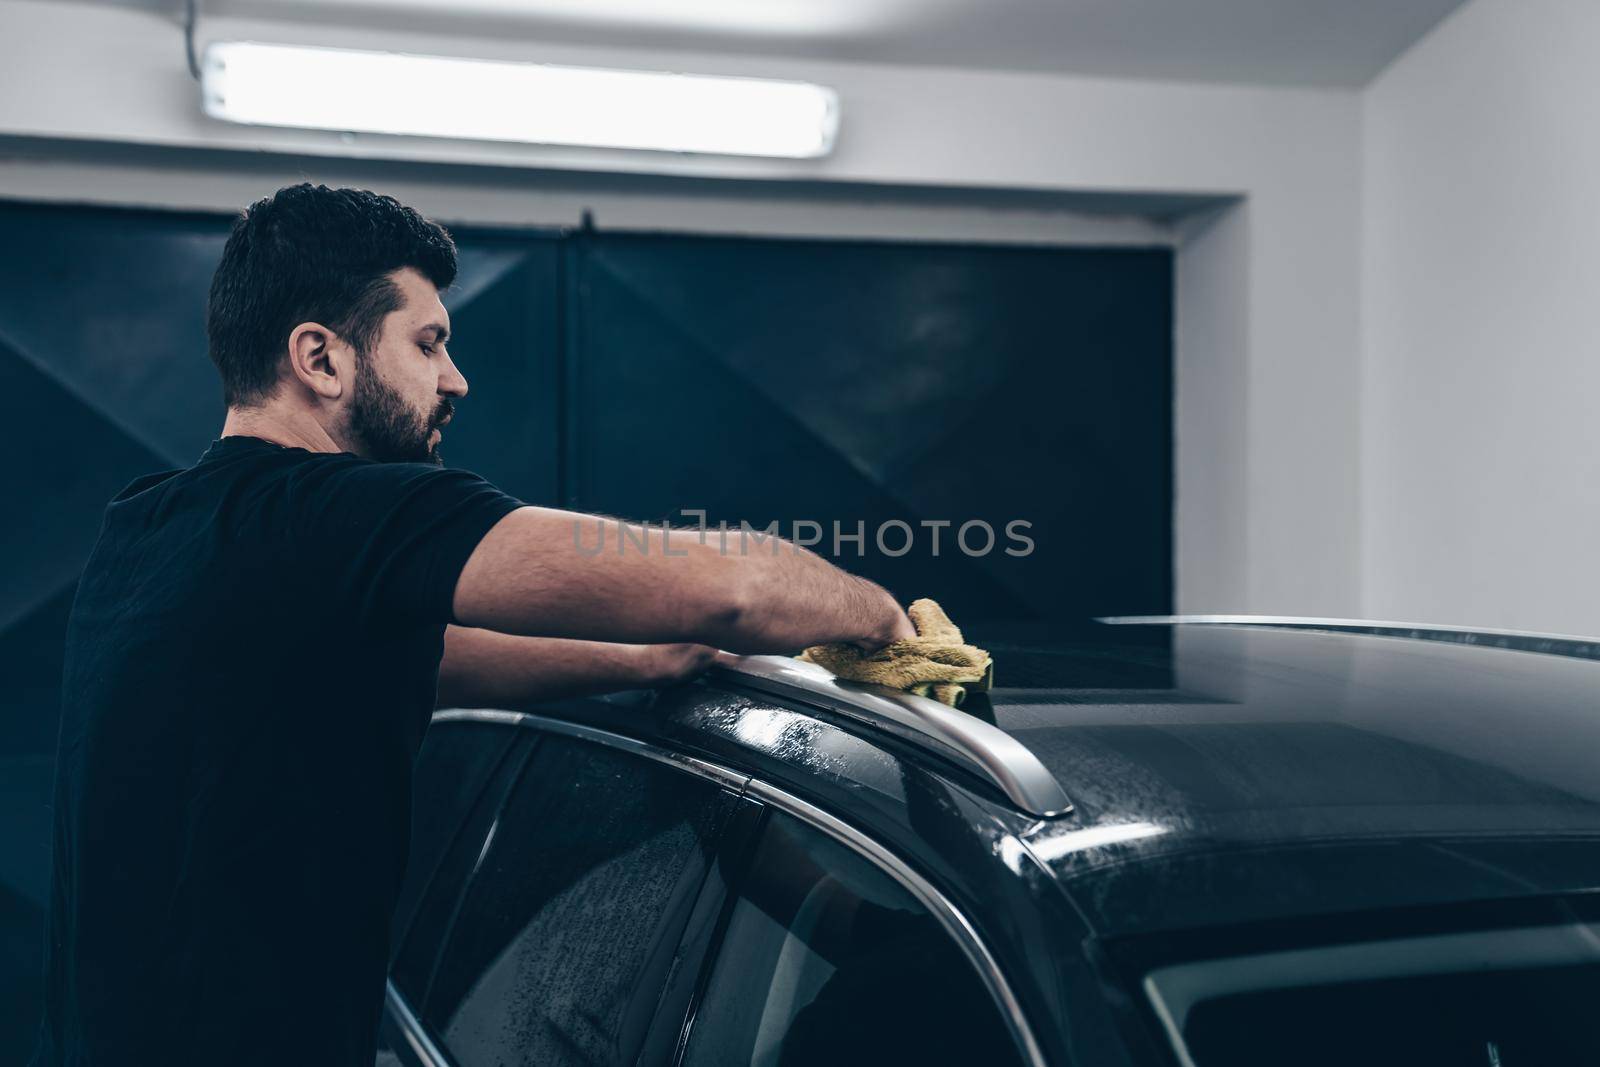 man cleans the car body with a towel. auto care.